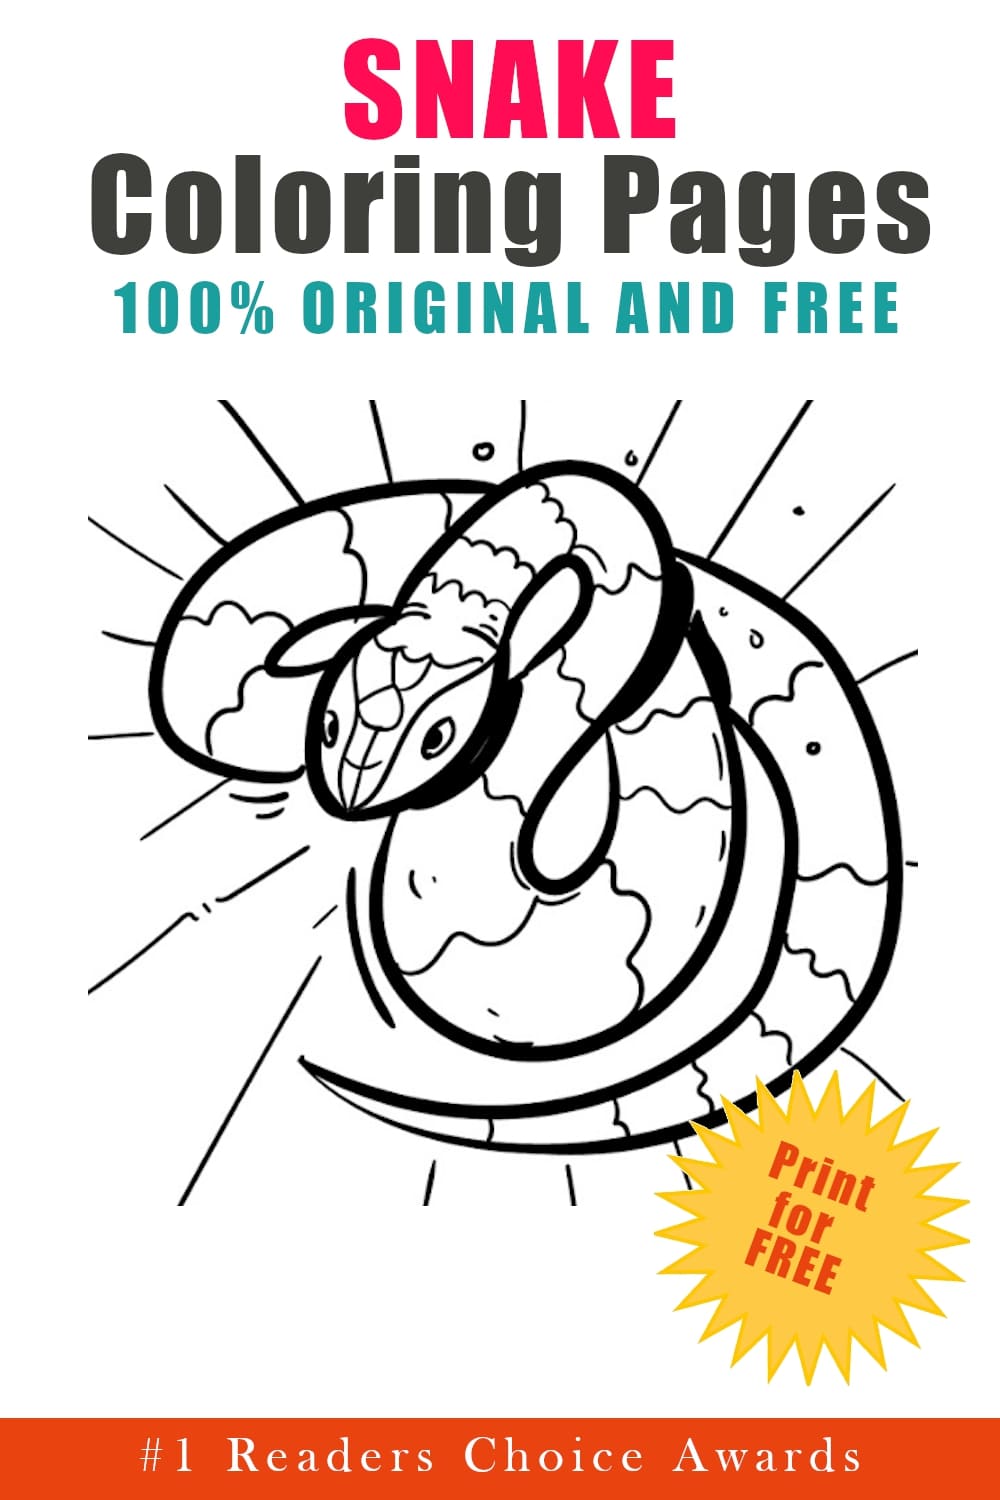 original and free snake coloring pages